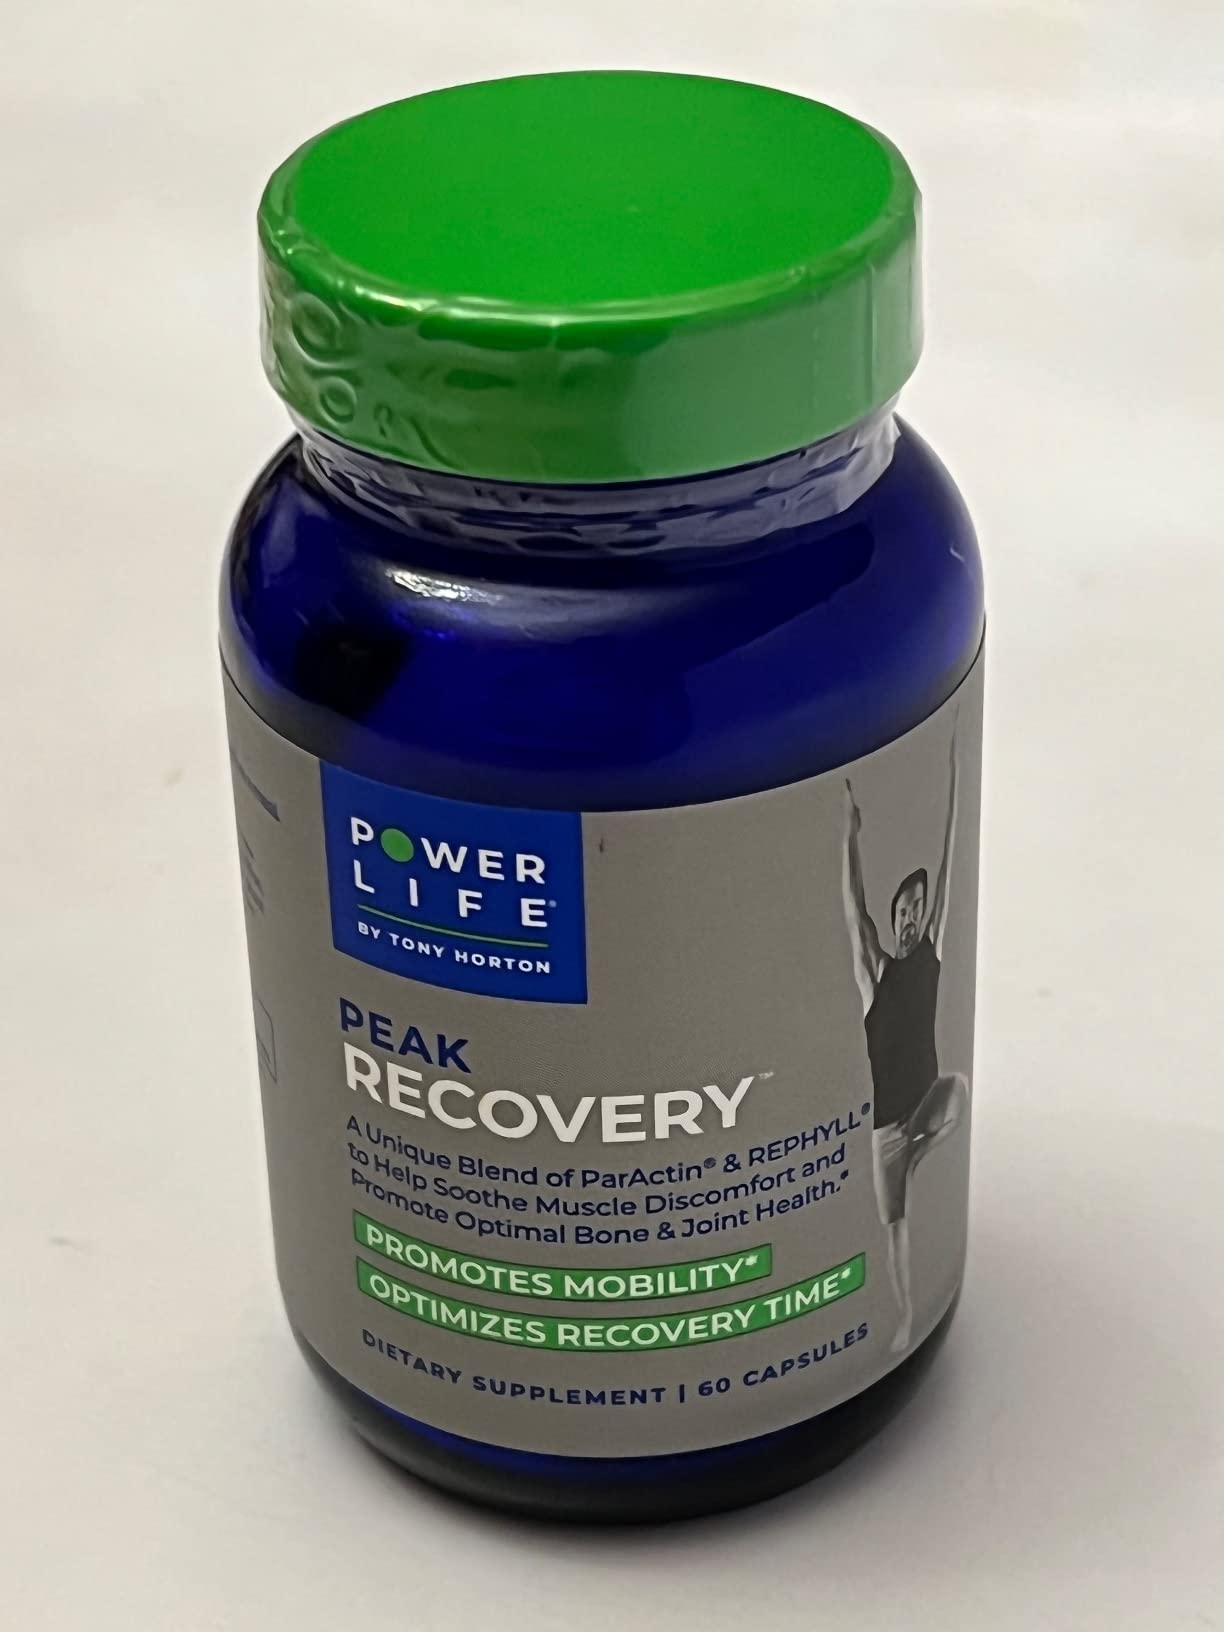 Bottle of Power Life Peak Recovery sitting on the counter.